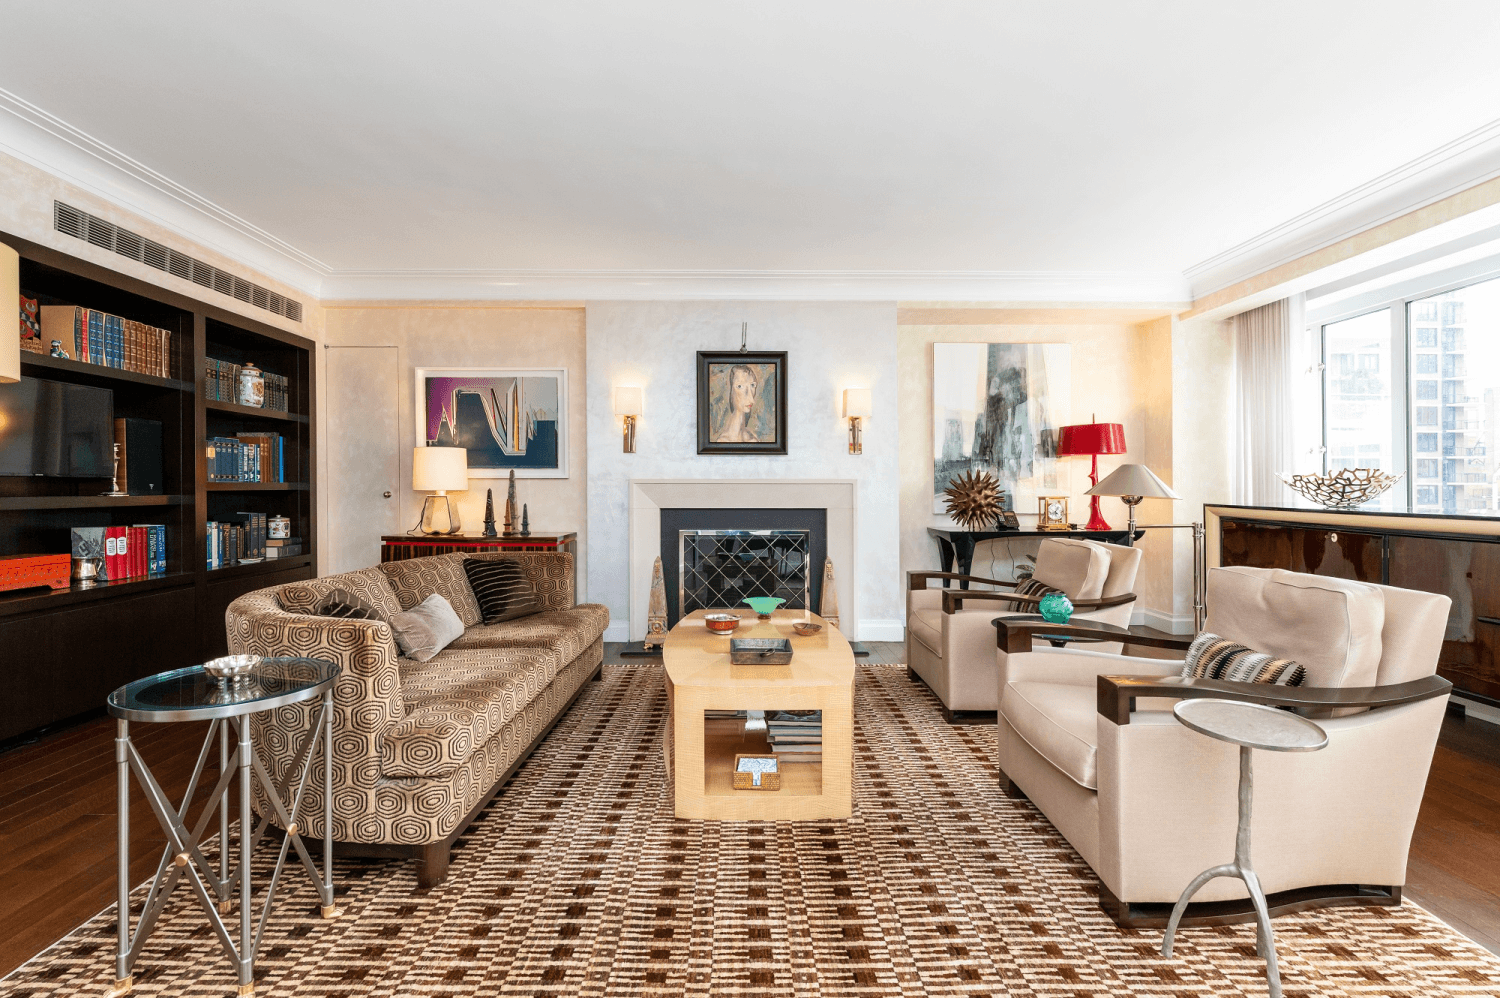 We are delighted to present this stunning 2 bedroom, 2 bathroom residence, situated on a high floor within the coveted D tower of the Manhattan House.